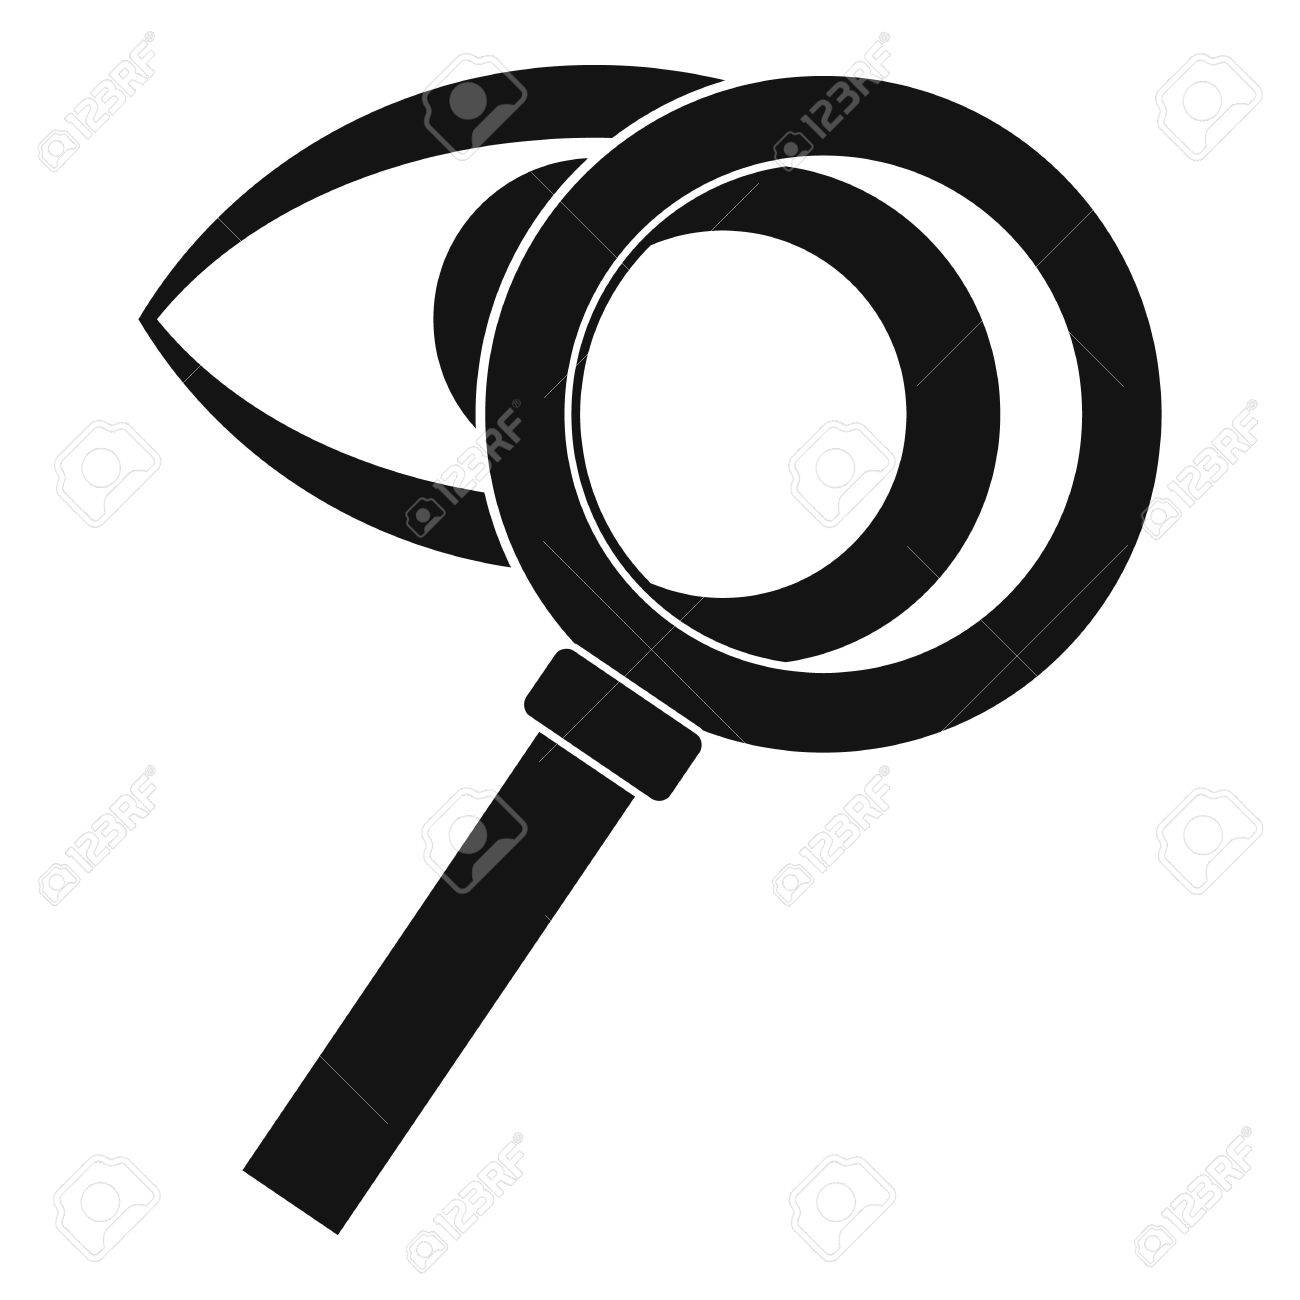 Magnifying Glass Vectors and Icons - SVGRepo Free SVG Vectors